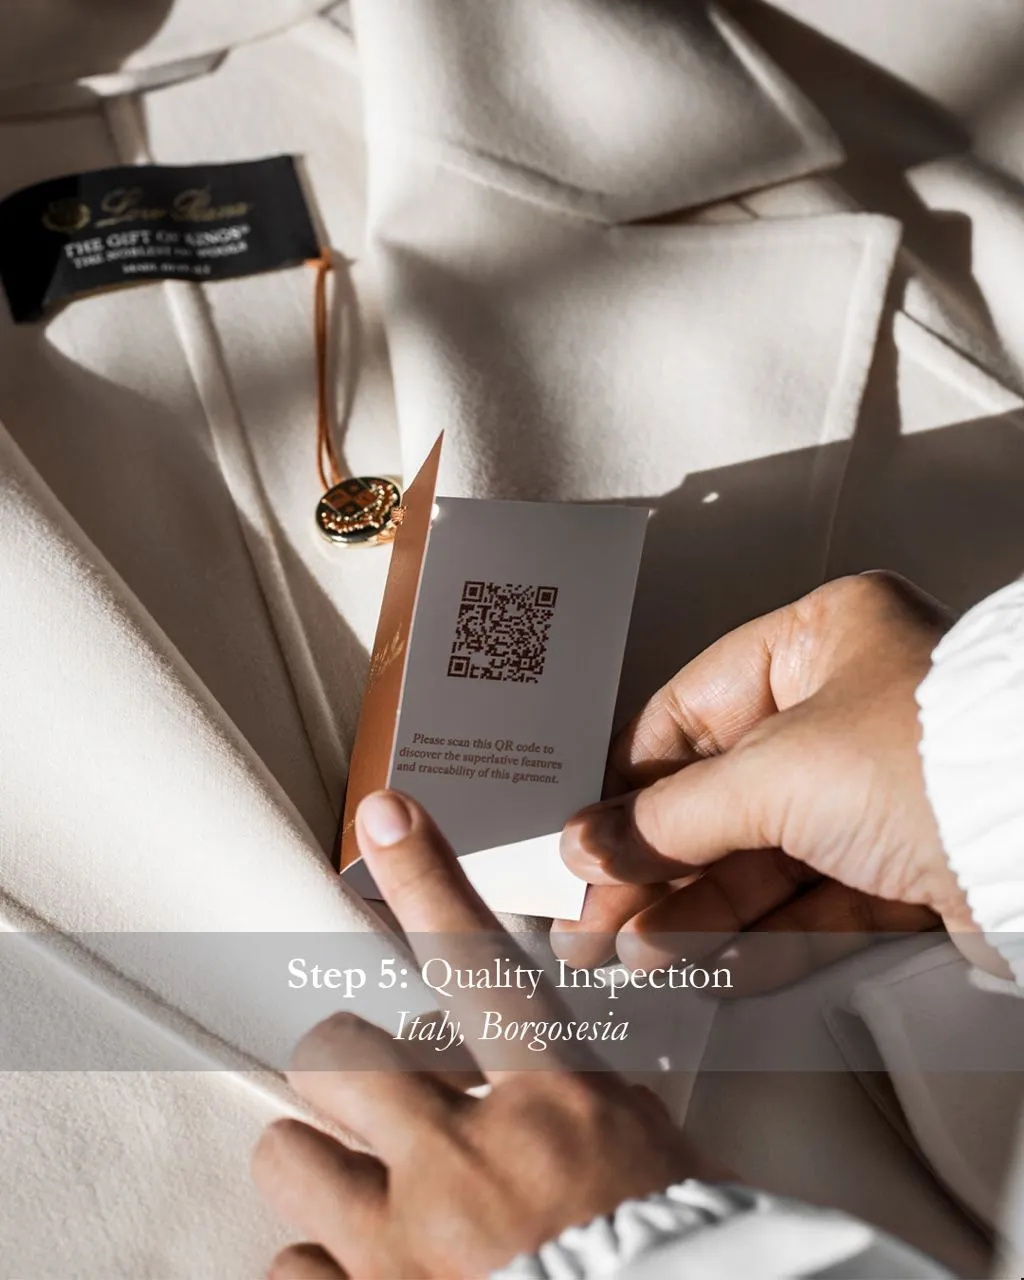 A picture of a QR code on a luxury jacket.